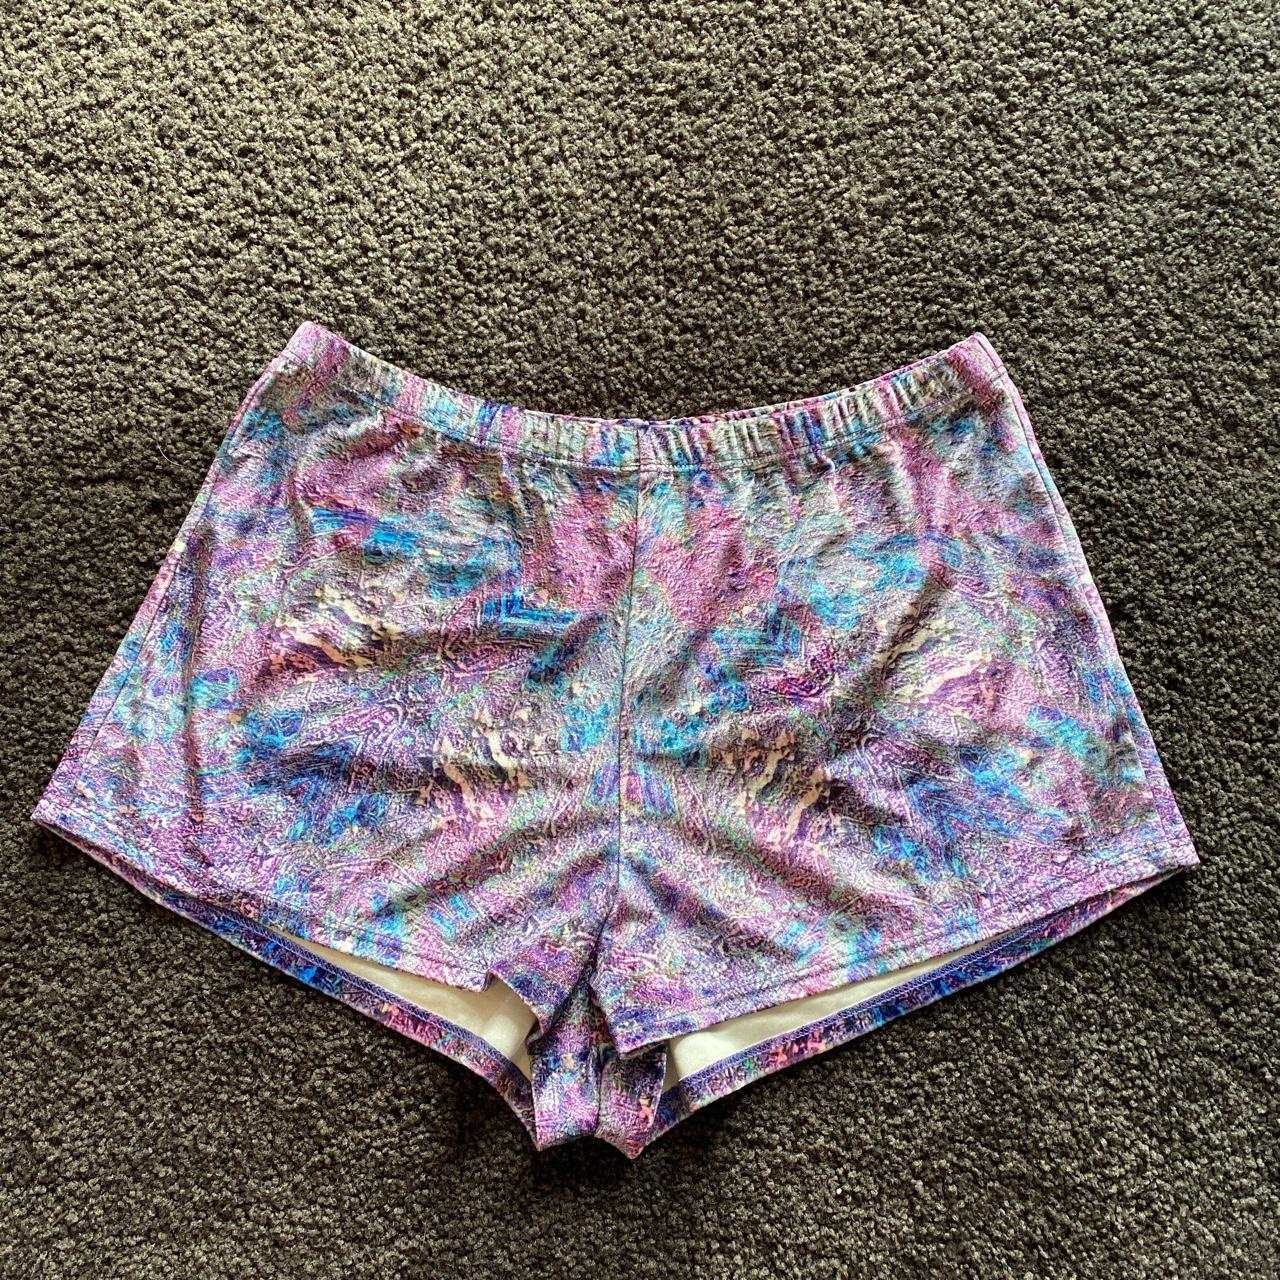 Liberated heart ecstasy shorts and crop. - Depop